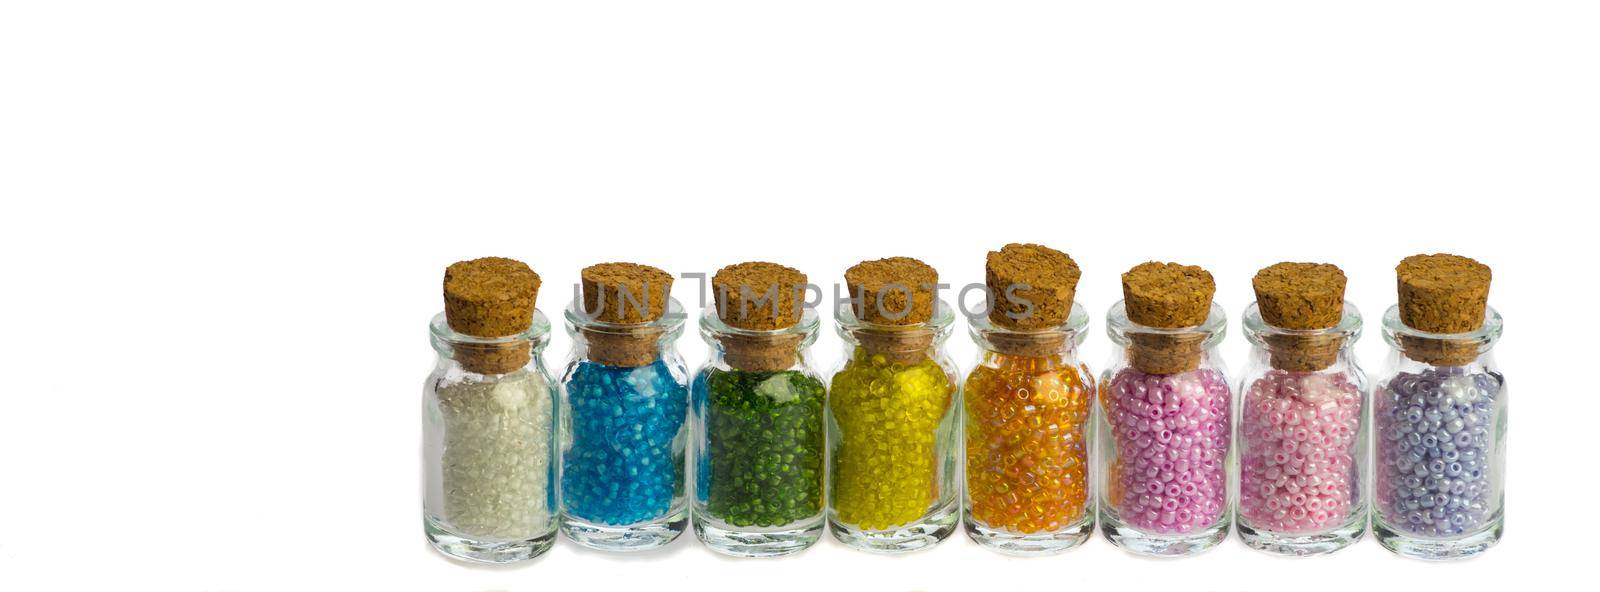 Little bottles in a row with colorful beads isolated on a white background, banner for facebook